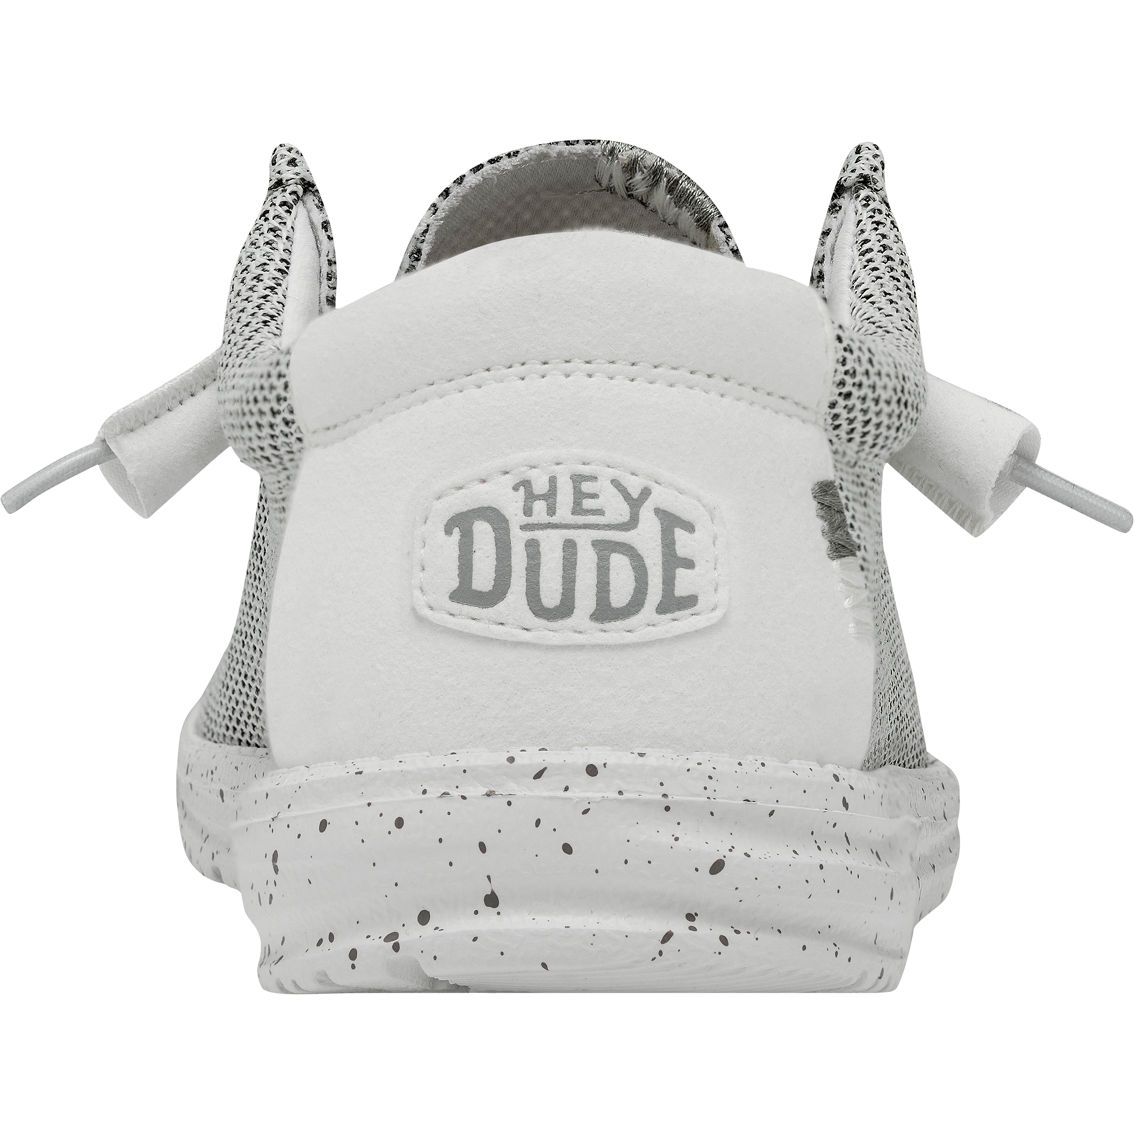 Hey Dude Wally Sox Shoes - Image 6 of 6